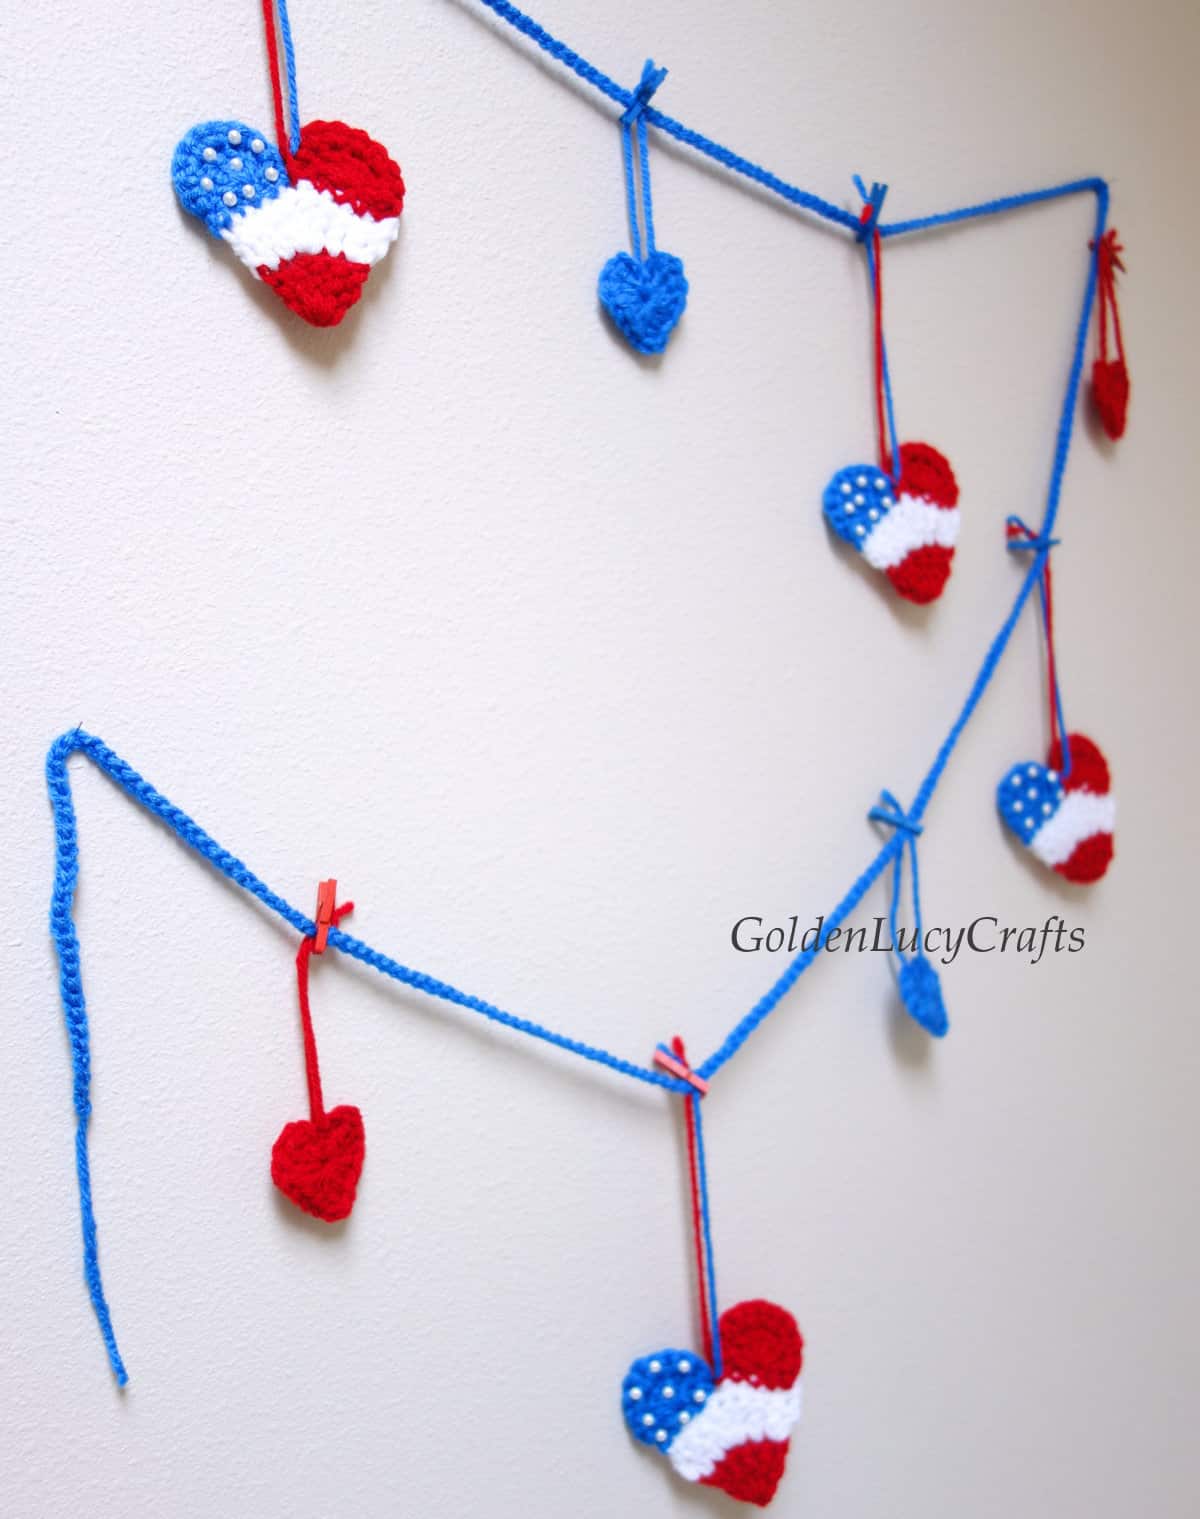 Crochet patriotic garland hanging on the wall.